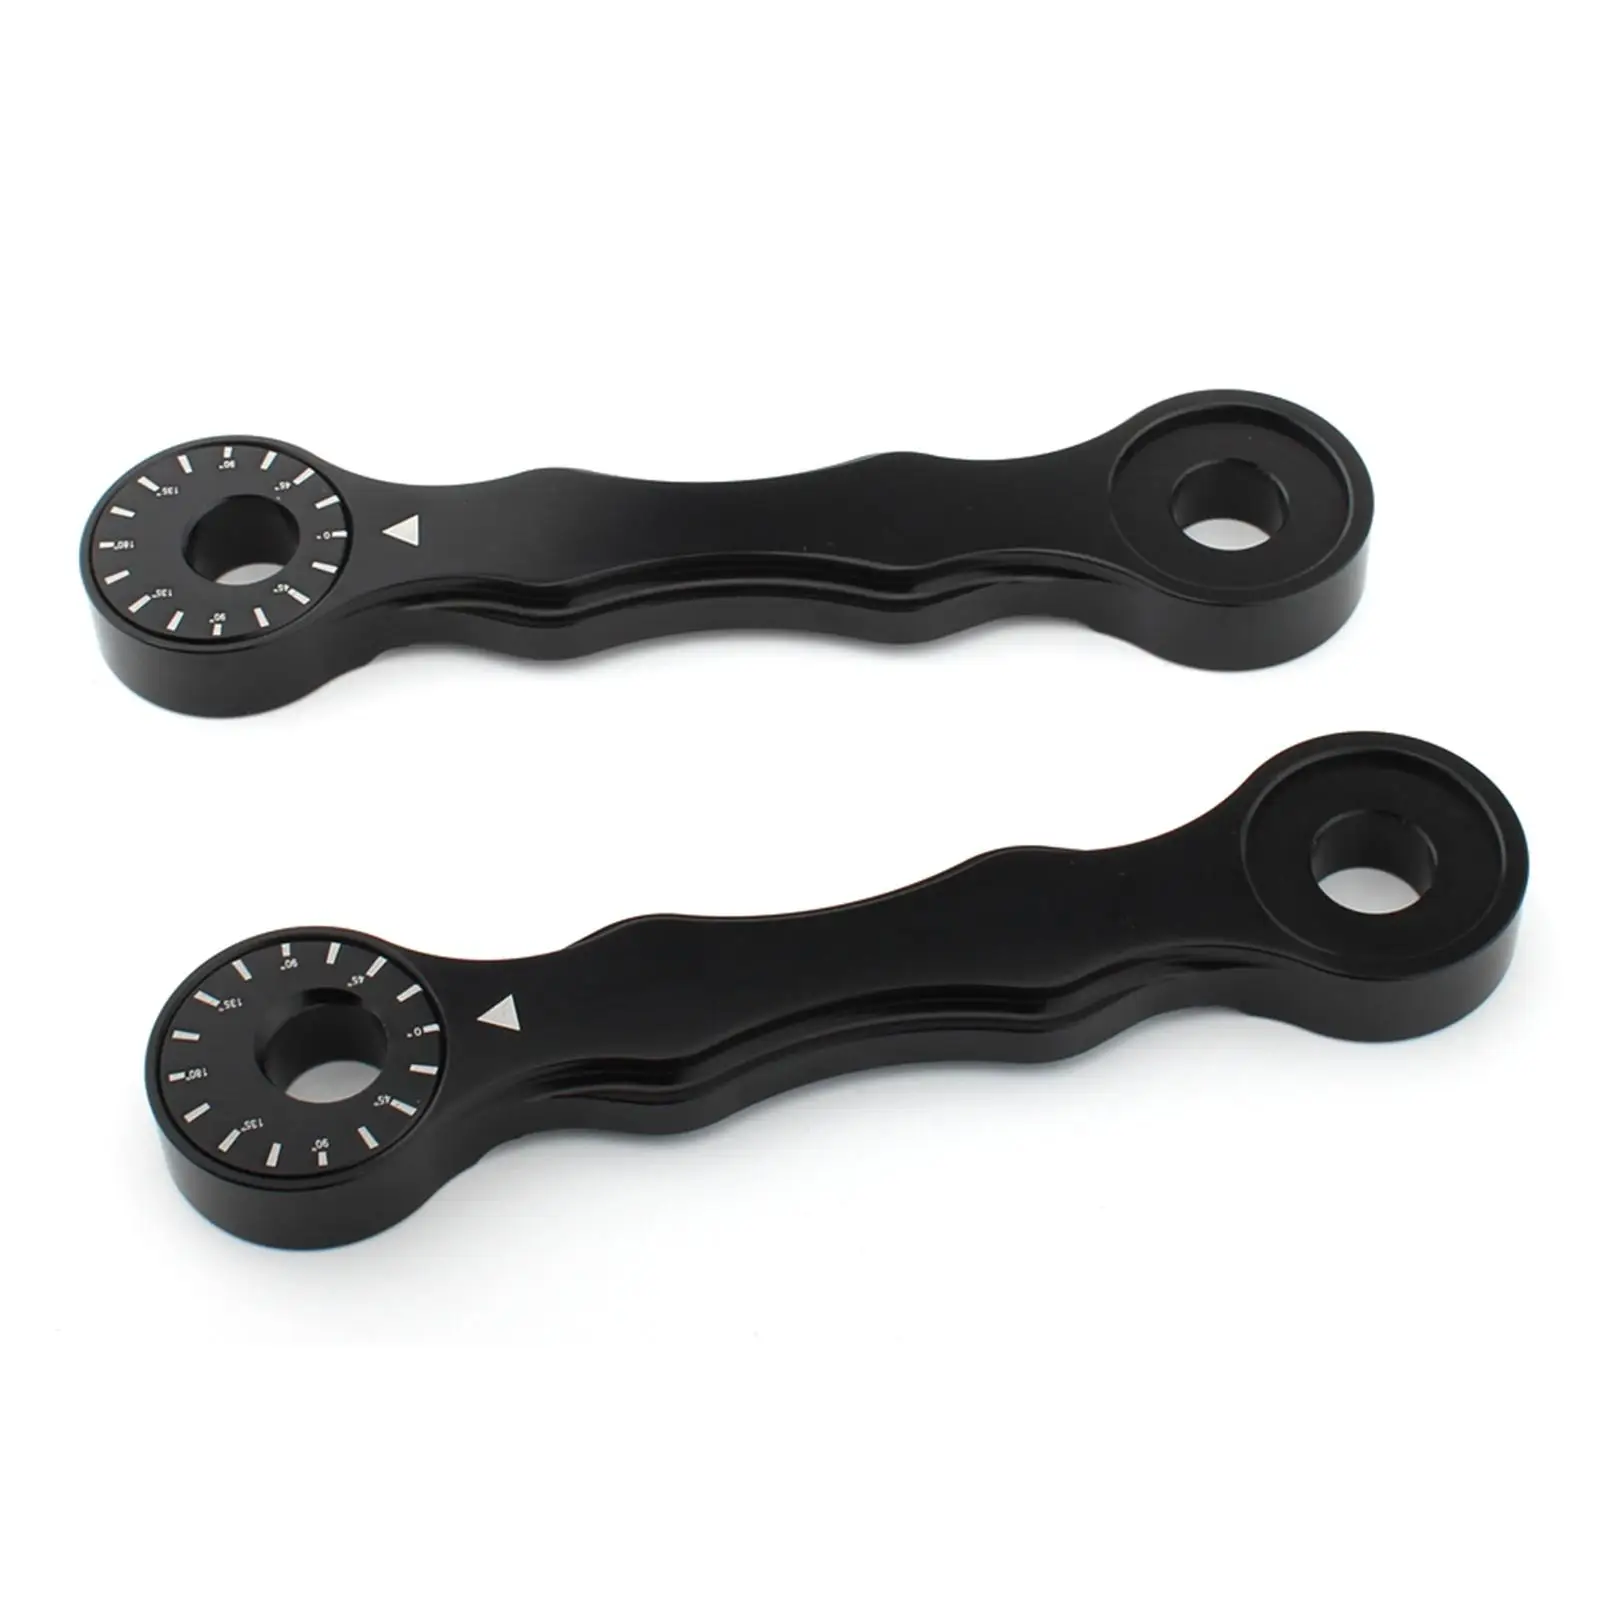 2 Pieces Motorcycle Lowering Links set Spare Parts High Performance Black replace parts for Suzuki RM125 200 Drz400 E S SM